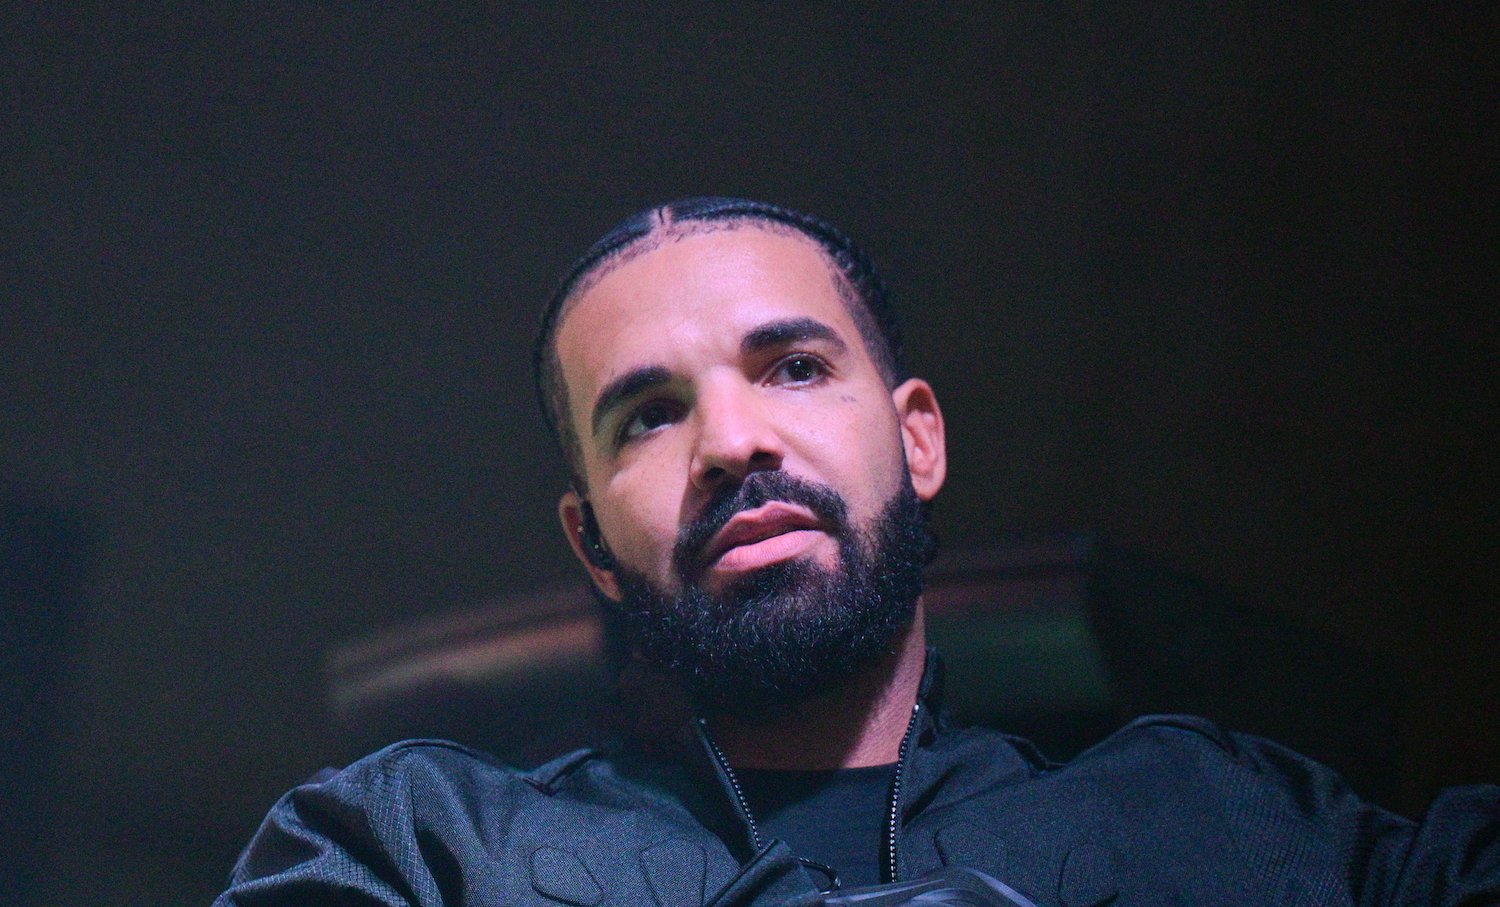 Drake, who was once impersonated by Fake Drake, posing for a photo wearing black